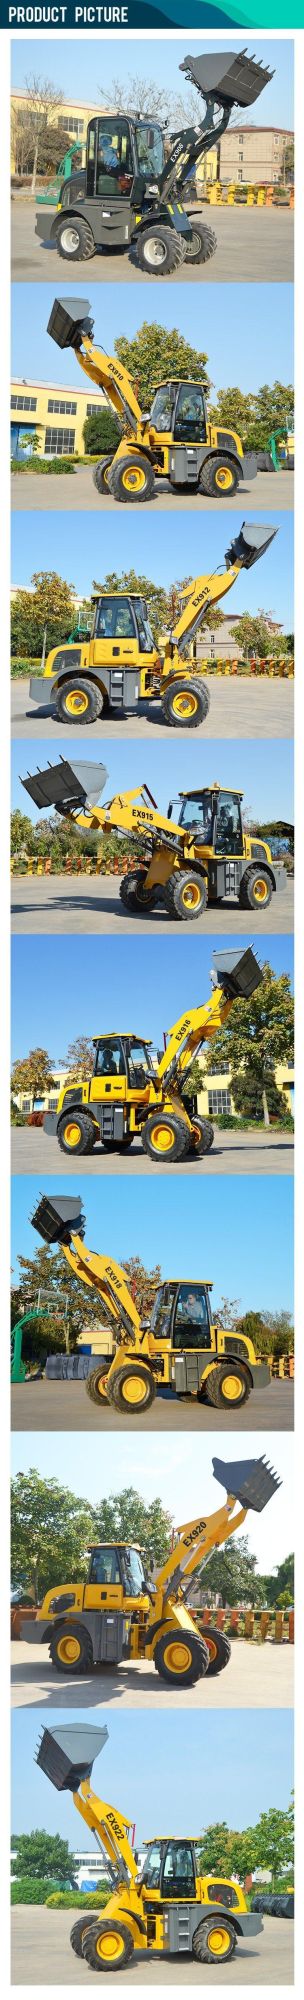 Small Loader Mini for Sale Best Prices Front End Loaders